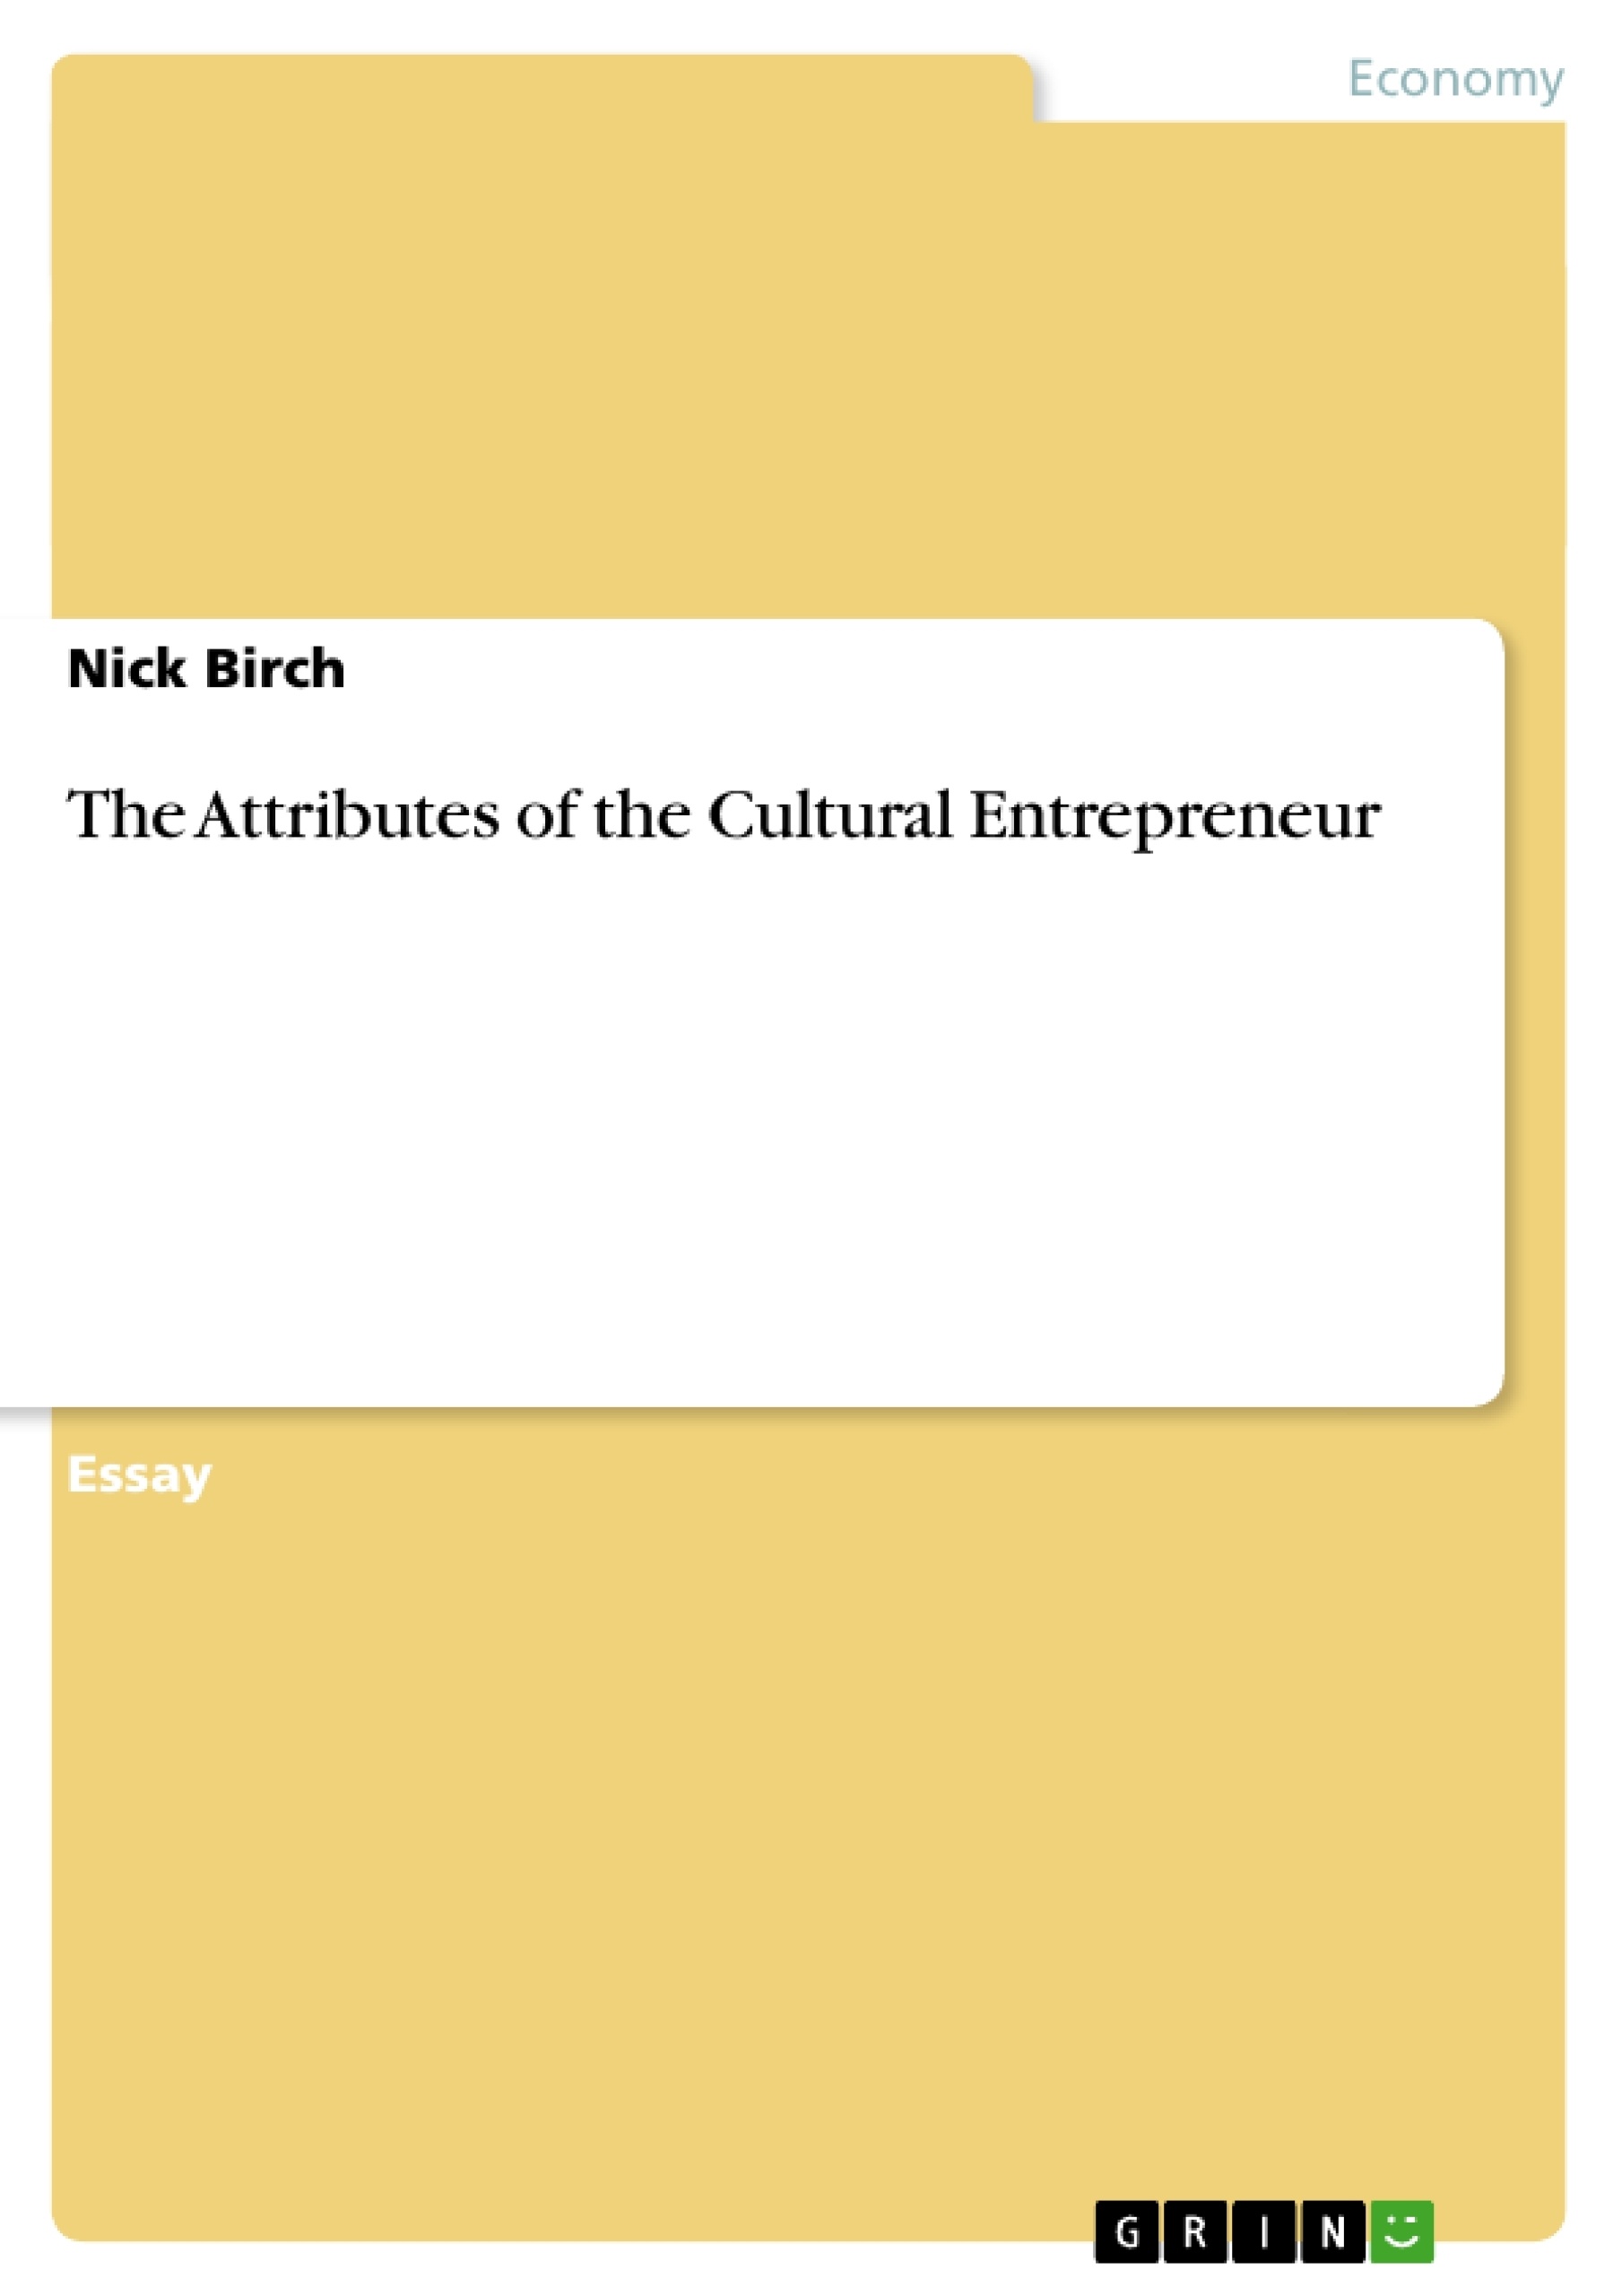 Título: The Attributes of the Cultural Entrepreneur